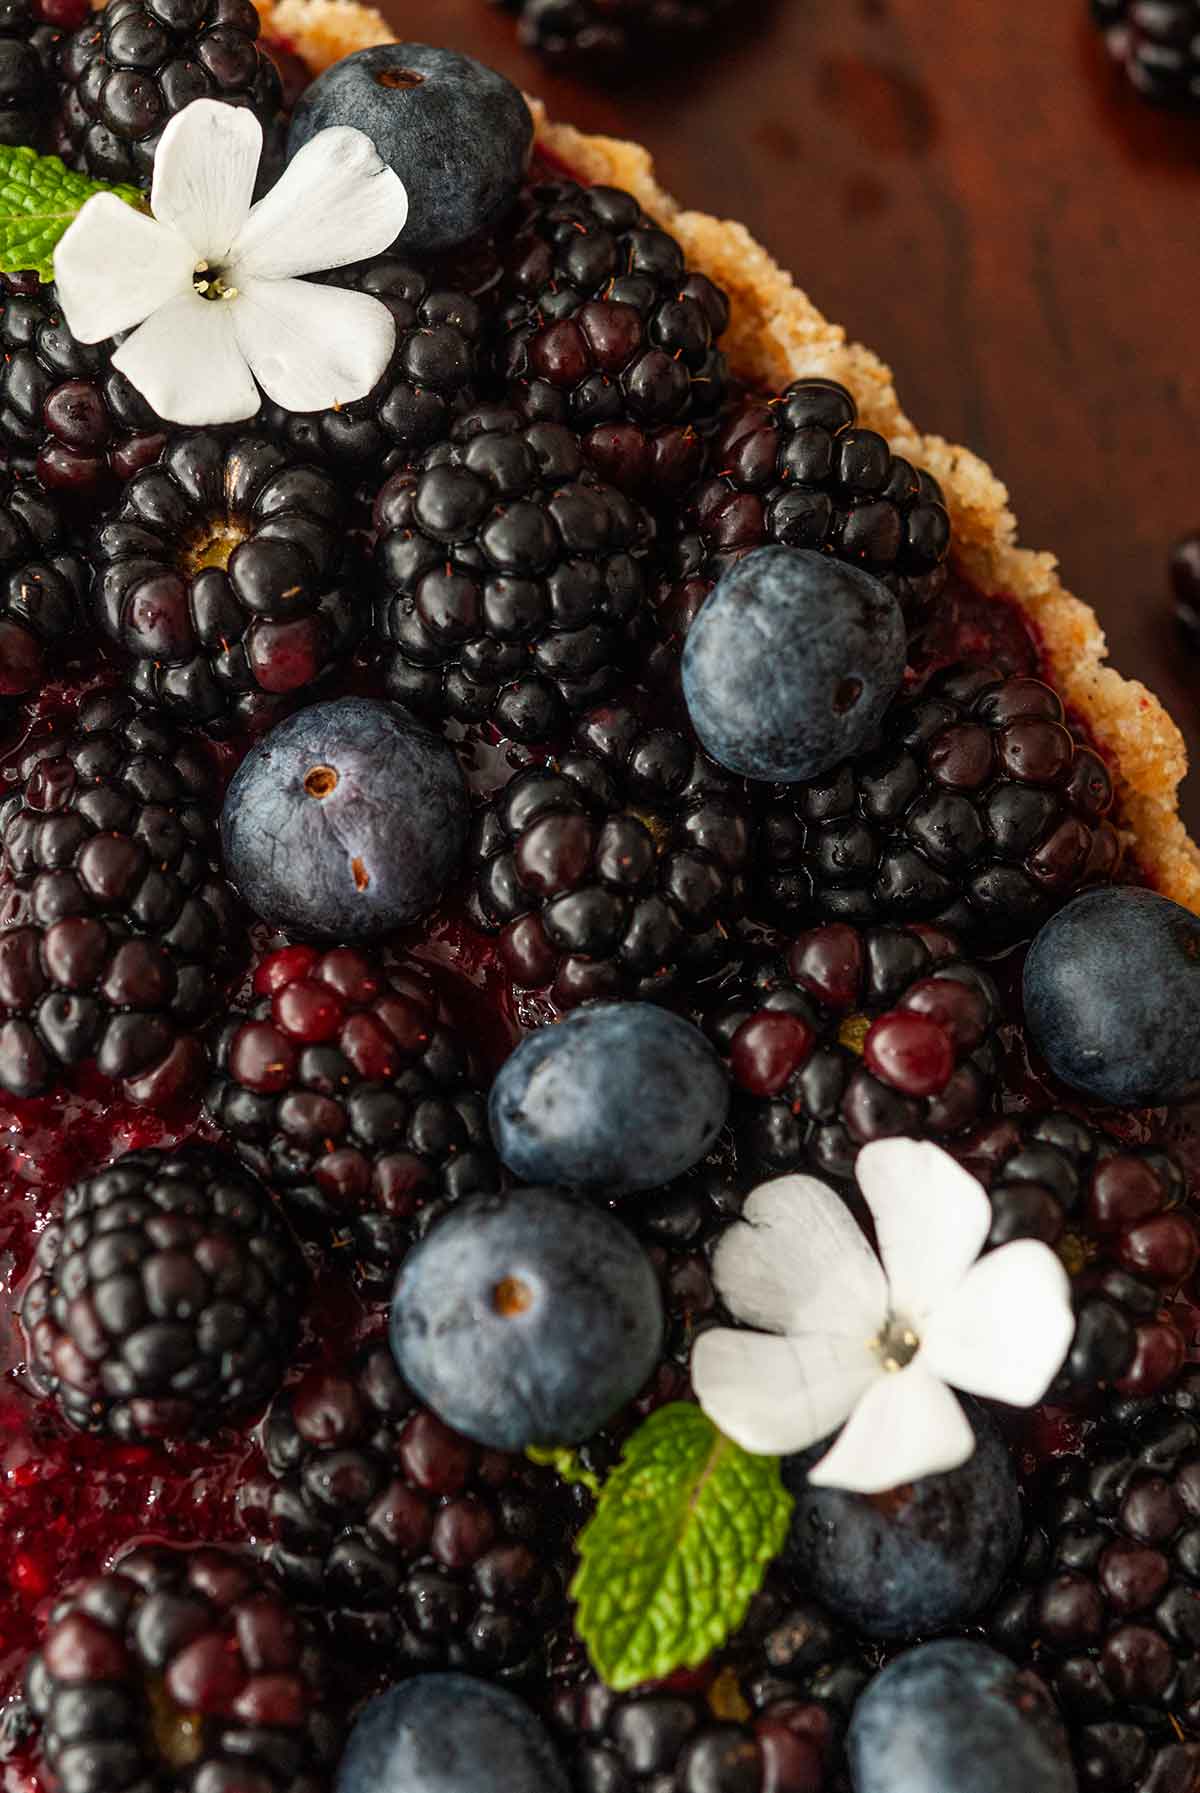 The flowers and berries on a cheesecake.